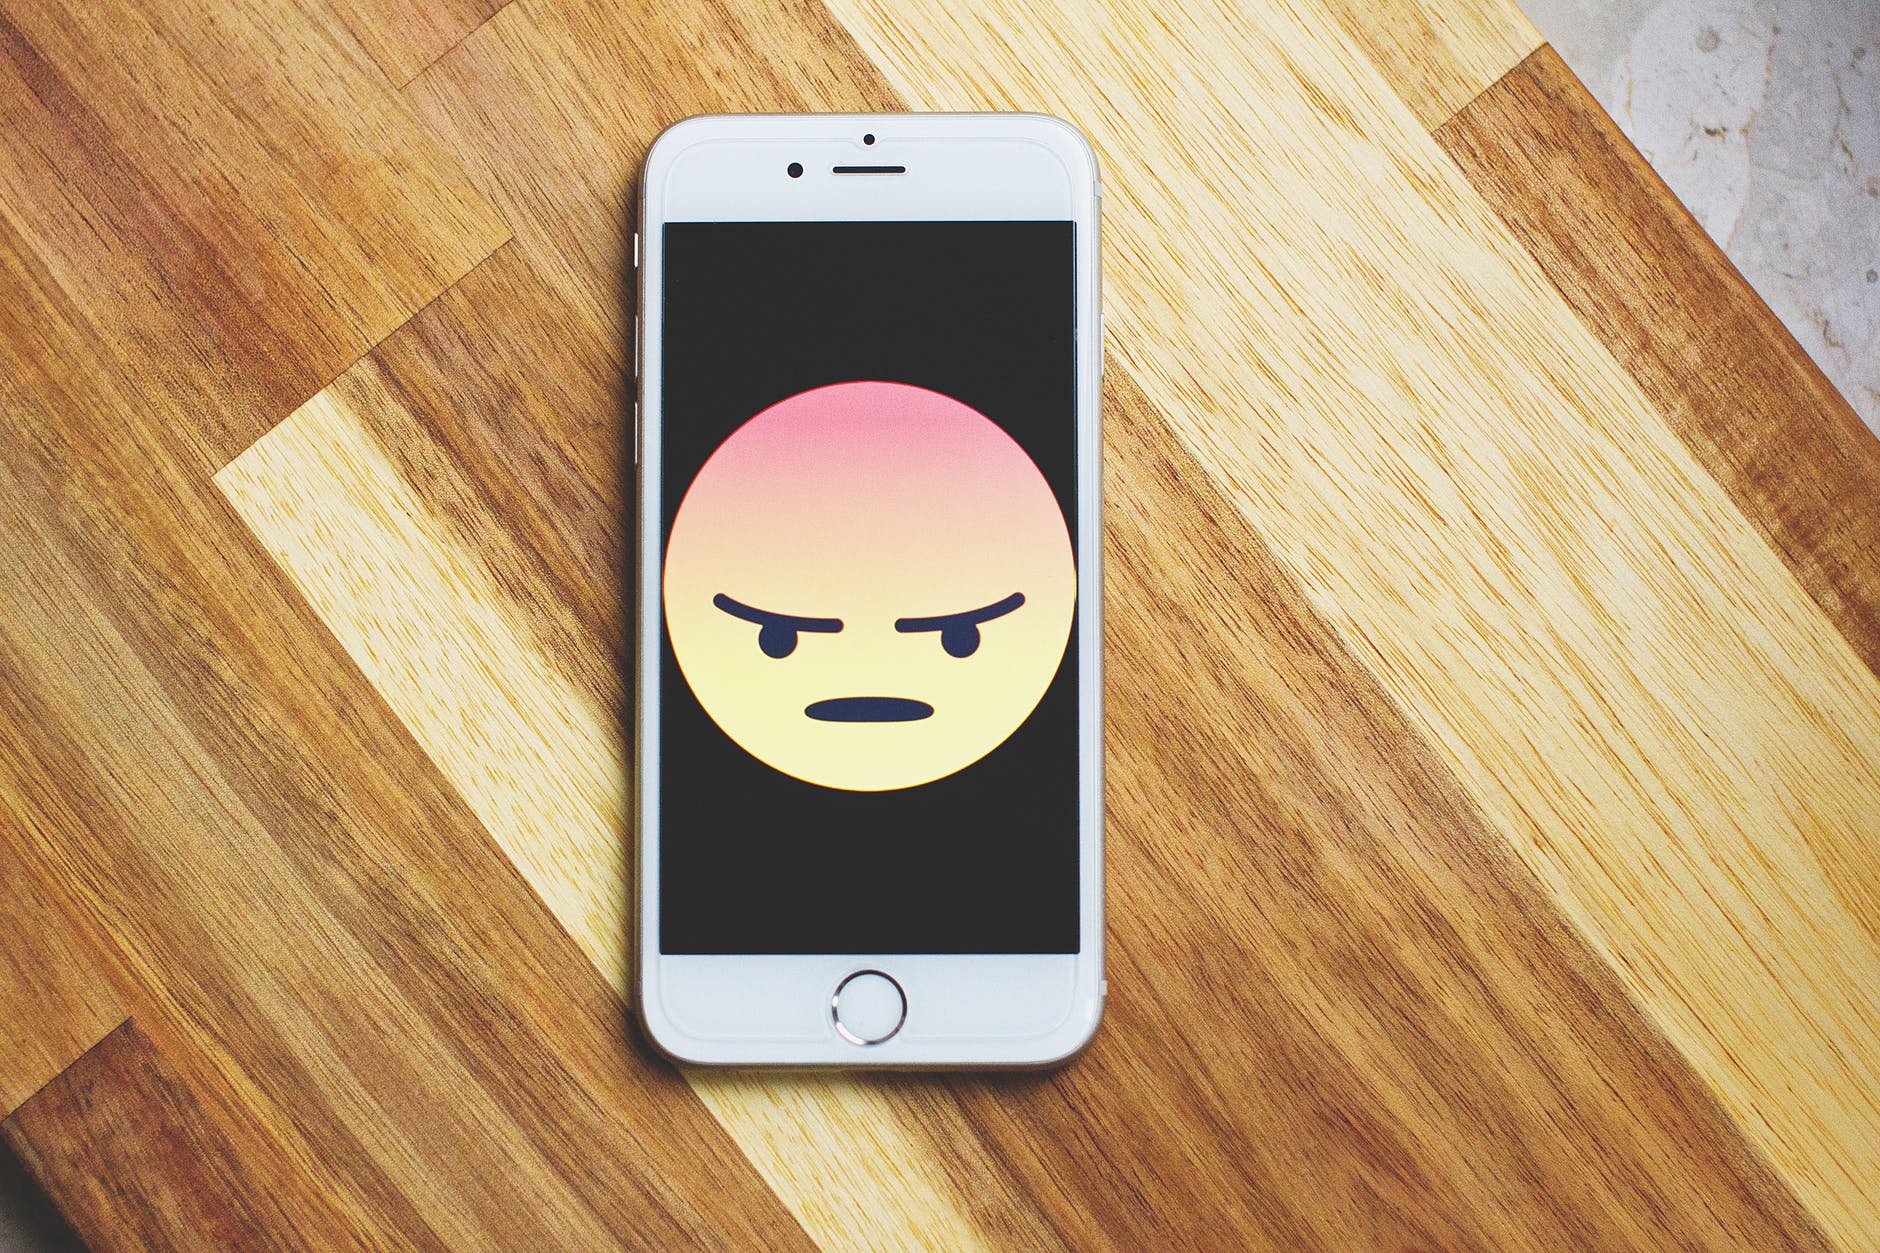 The angry face emoji on an iPhone